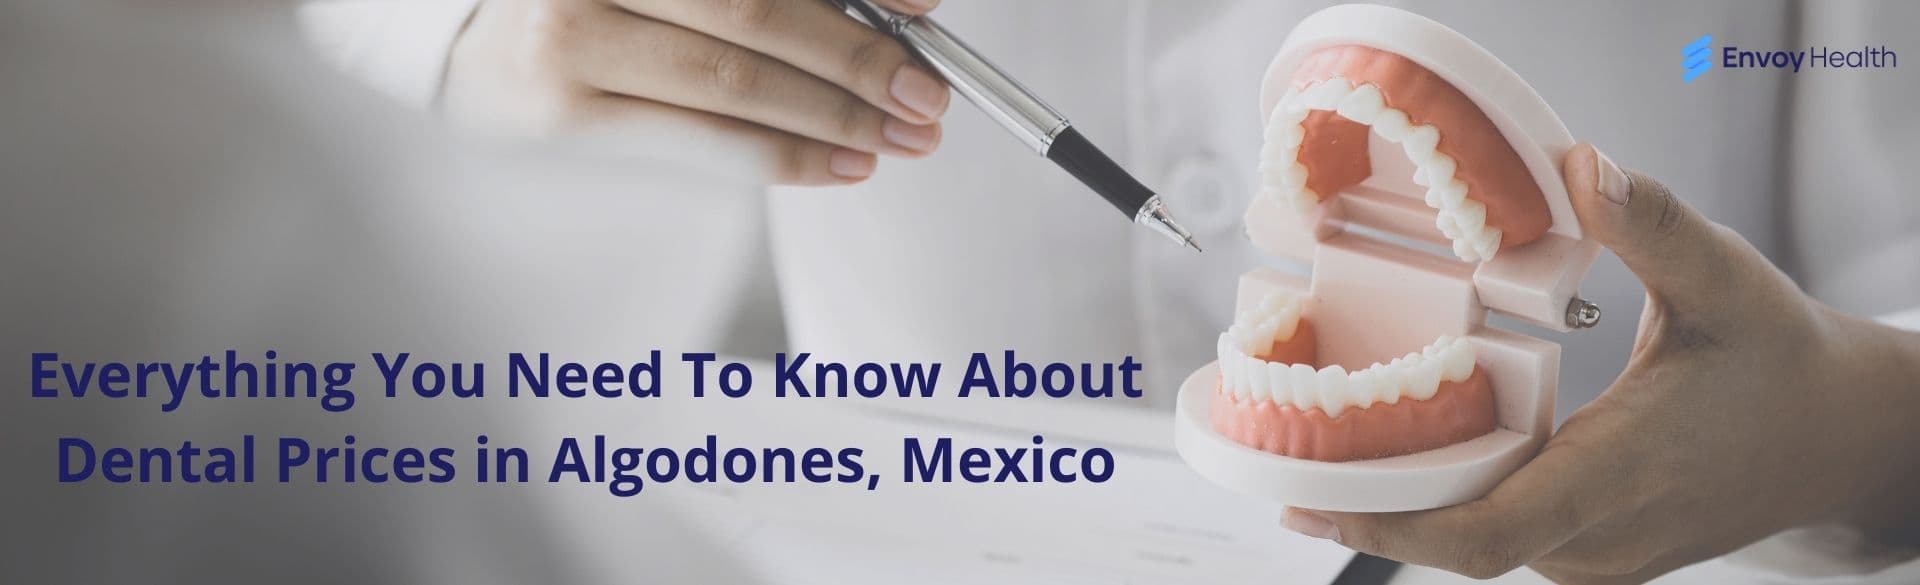 Everything You Need To Know About Dental Prices in Algodones, Mexico